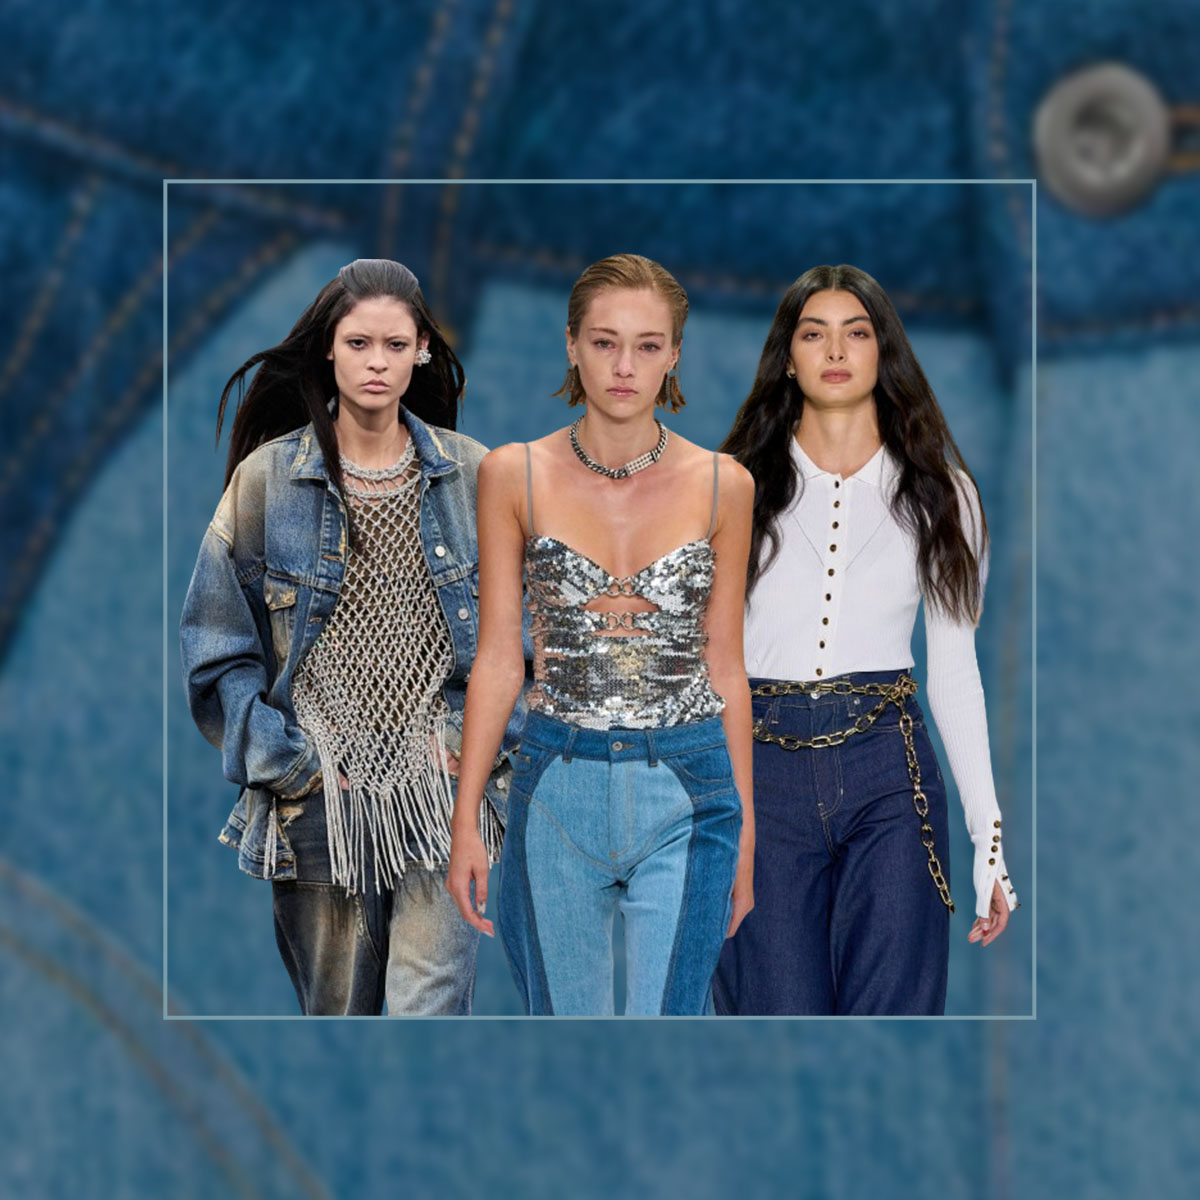 10 Denim Trends You'll Want To Rock In 2023